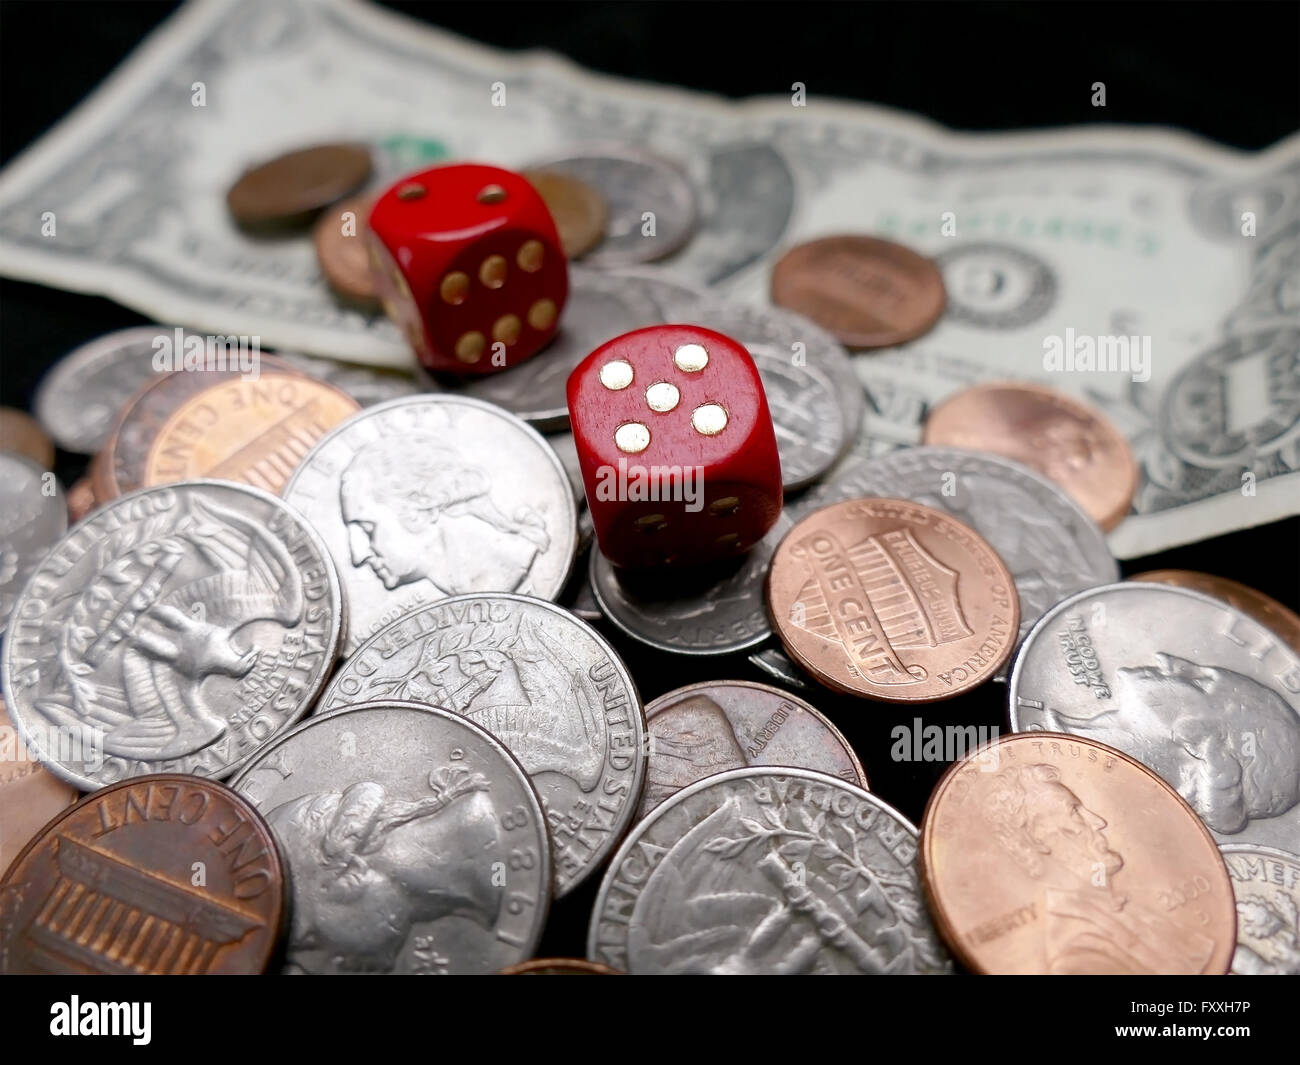 Dice on paper money and coins. Gambling concept Stock Photo